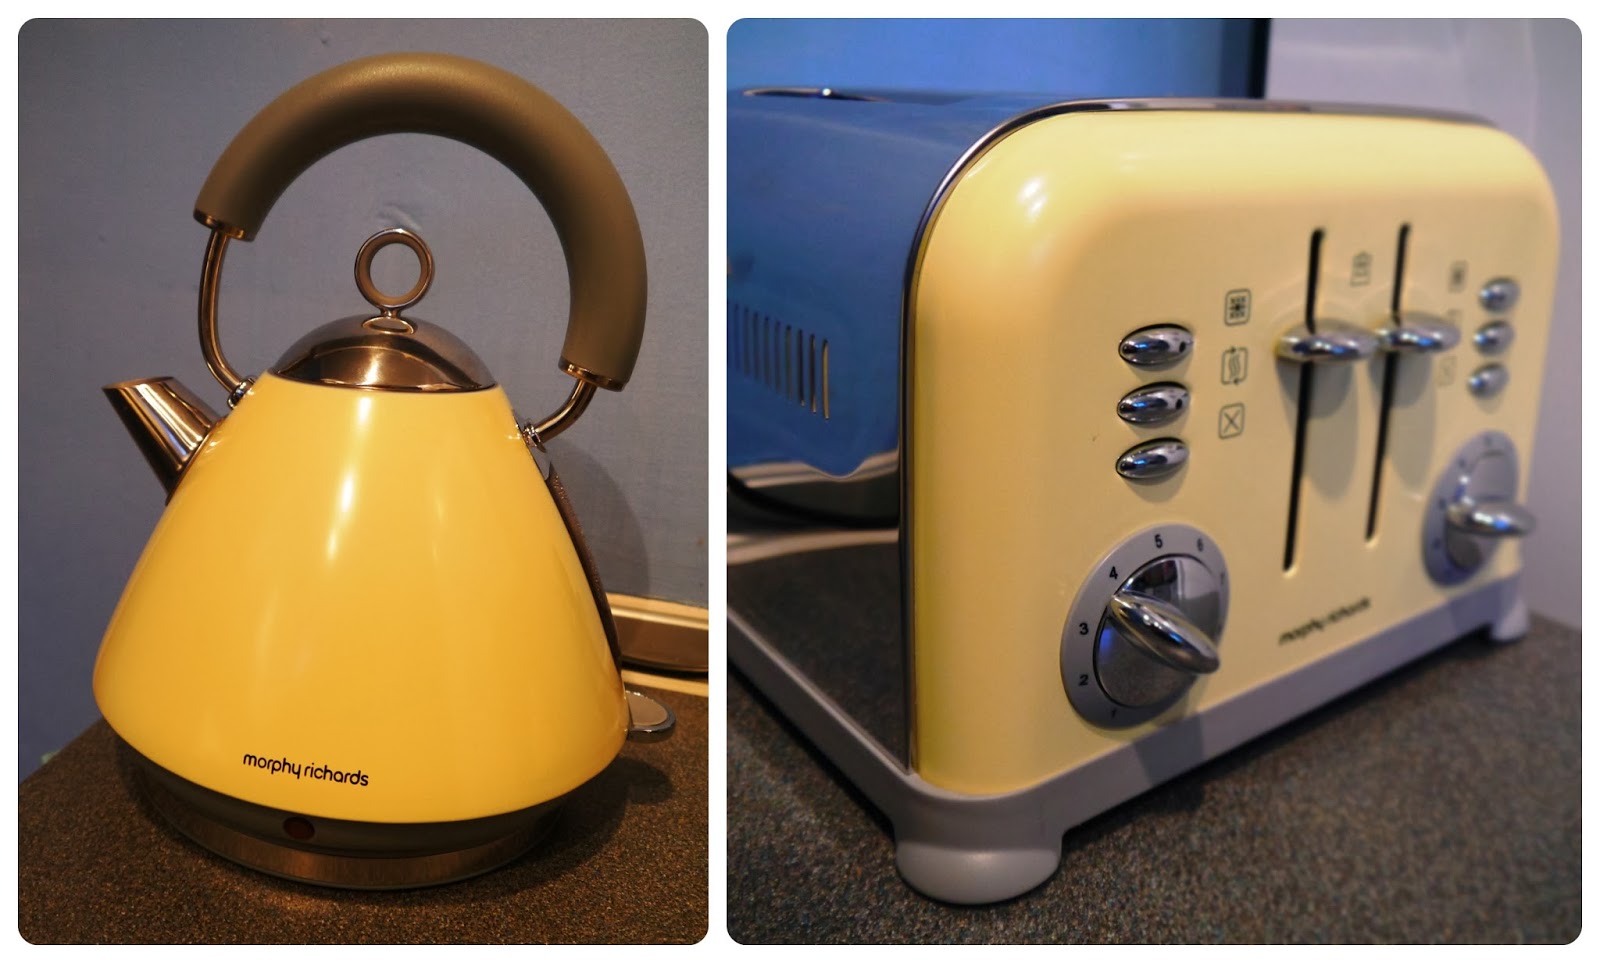 Morphy Richards Kettle and Toaster